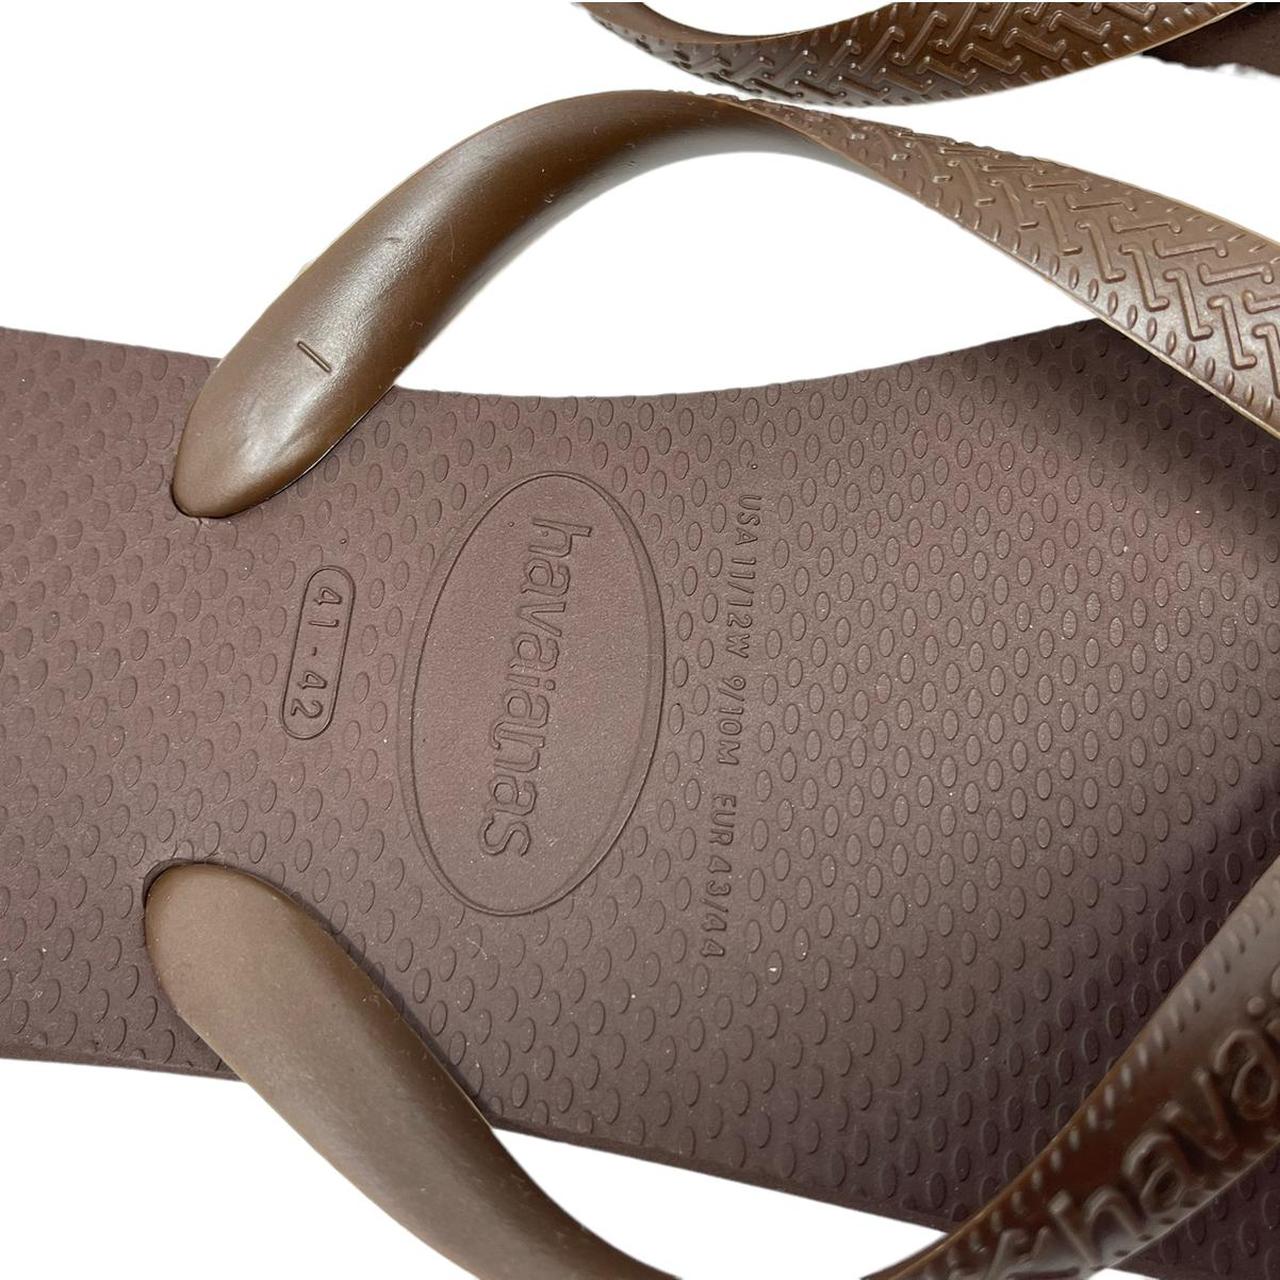 Product Image 4 - Havaianas Brown Flip Flops

Great condition
Size